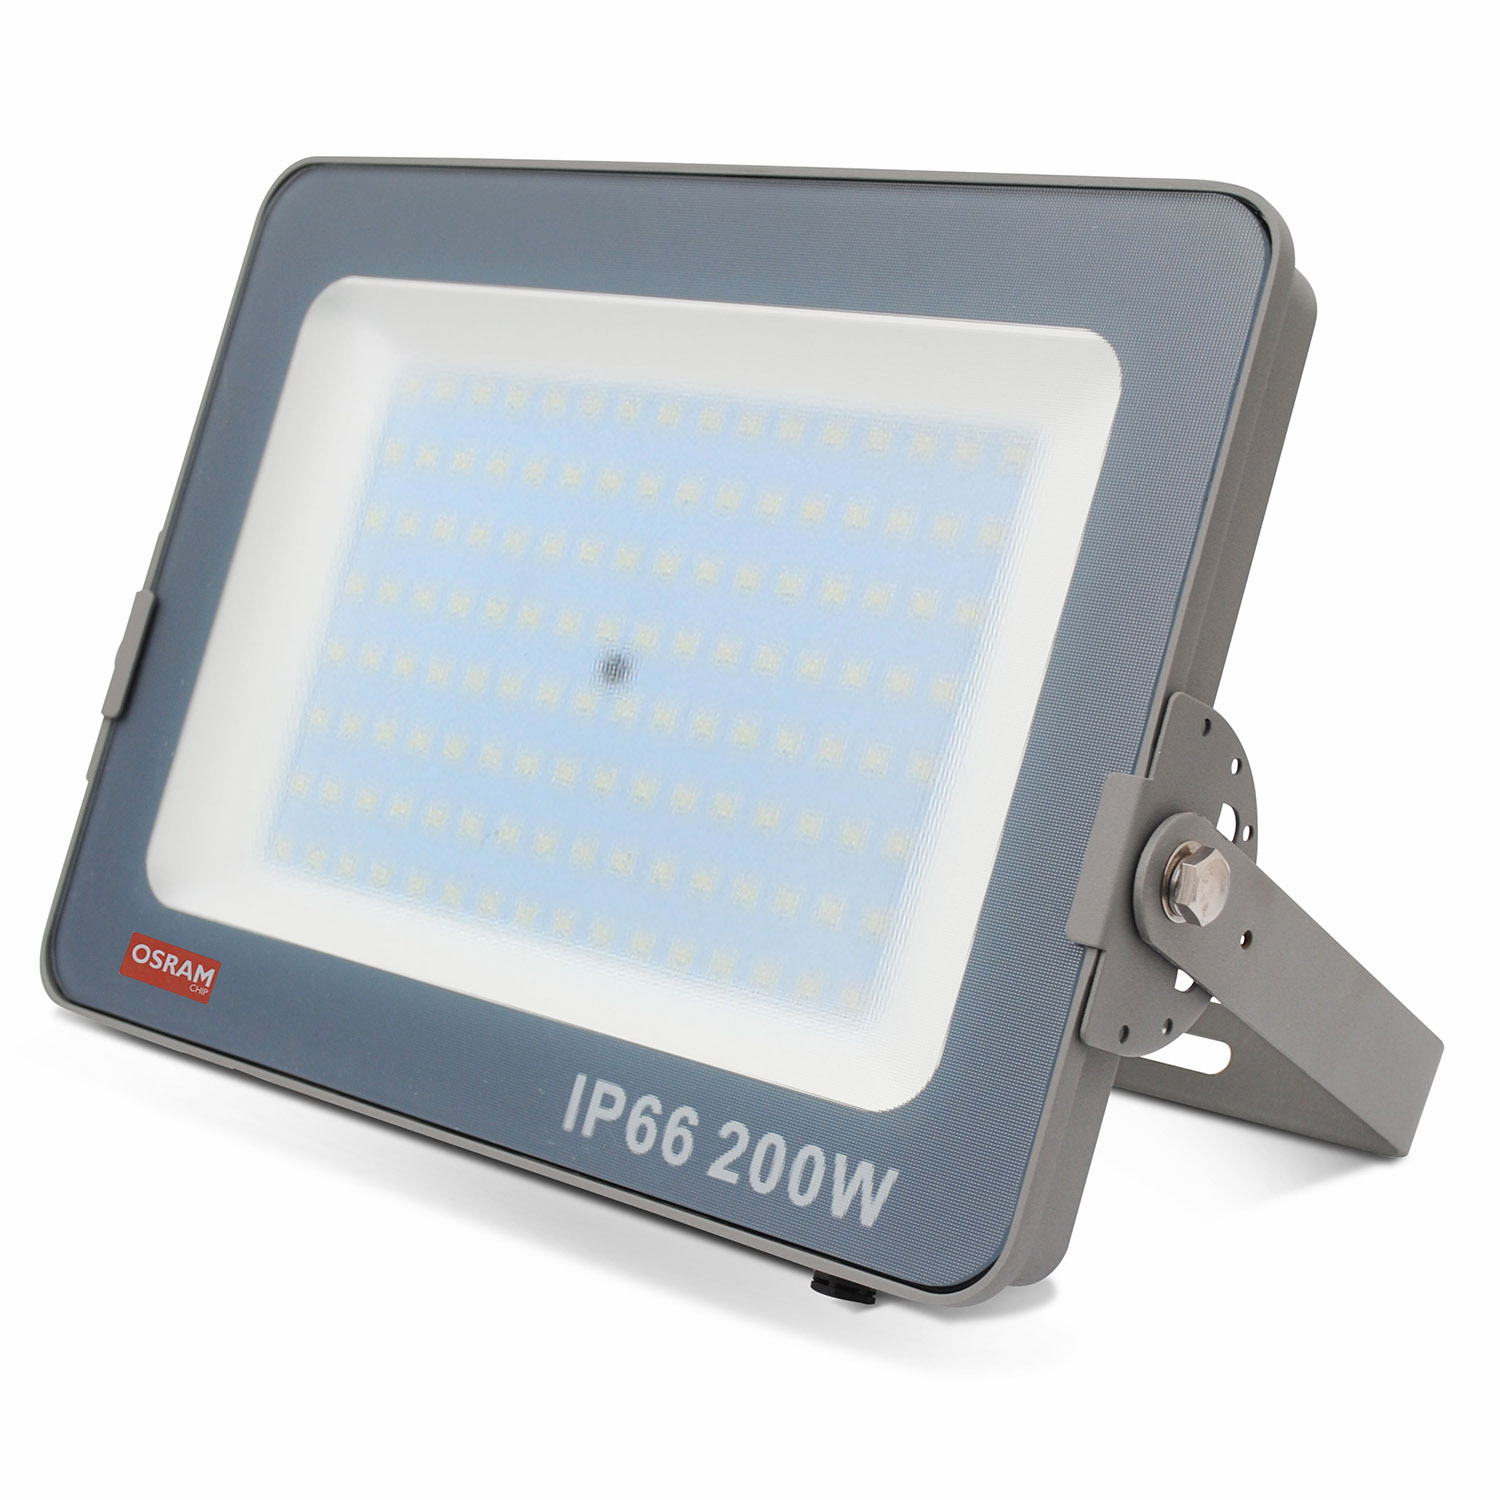 raid point Evaporate Led Spotlight Chipled Osram Pro, 200w, Warm White. The 200w Smd Led  Spotlight With Osram Chip Is A Technological Breakthrough In High  Efficiency, Being A Very Interesting Option In All Kinds Of -